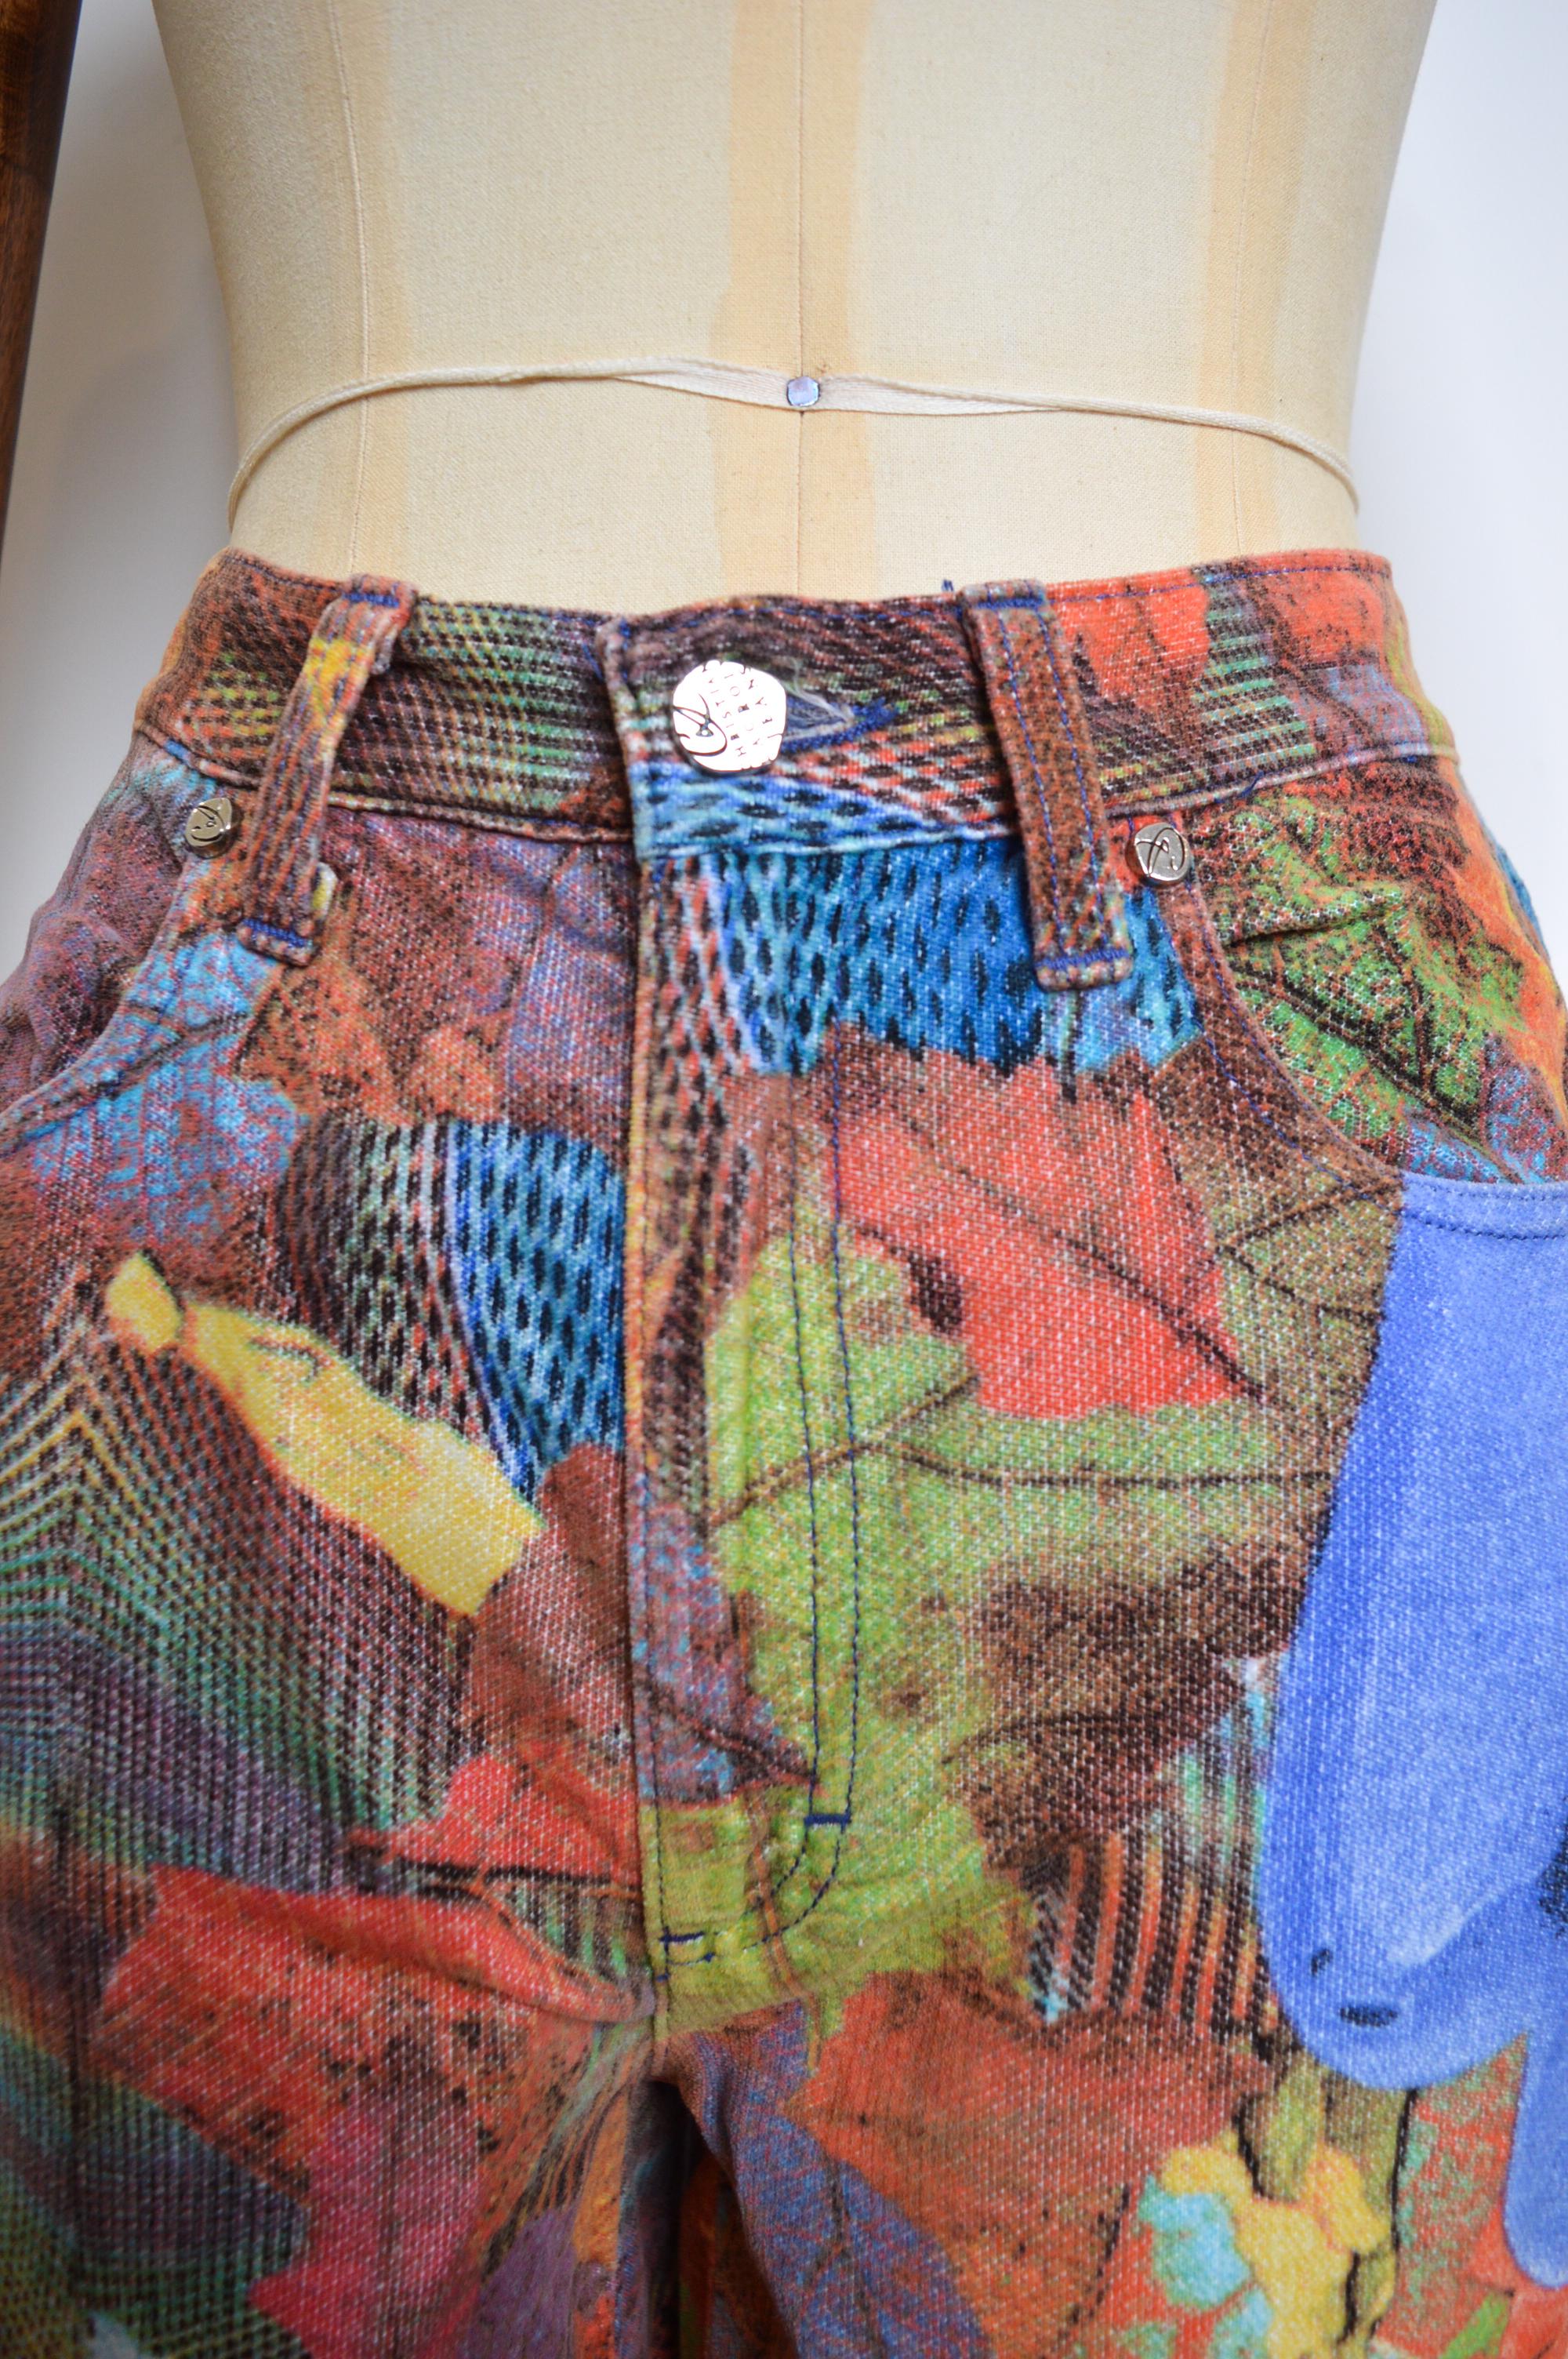 90s Vintage Christian Lacroix High Waist Orange Leafy Trippy Velvet Jeans Pants In Good Condition For Sale In Sheffield, GB